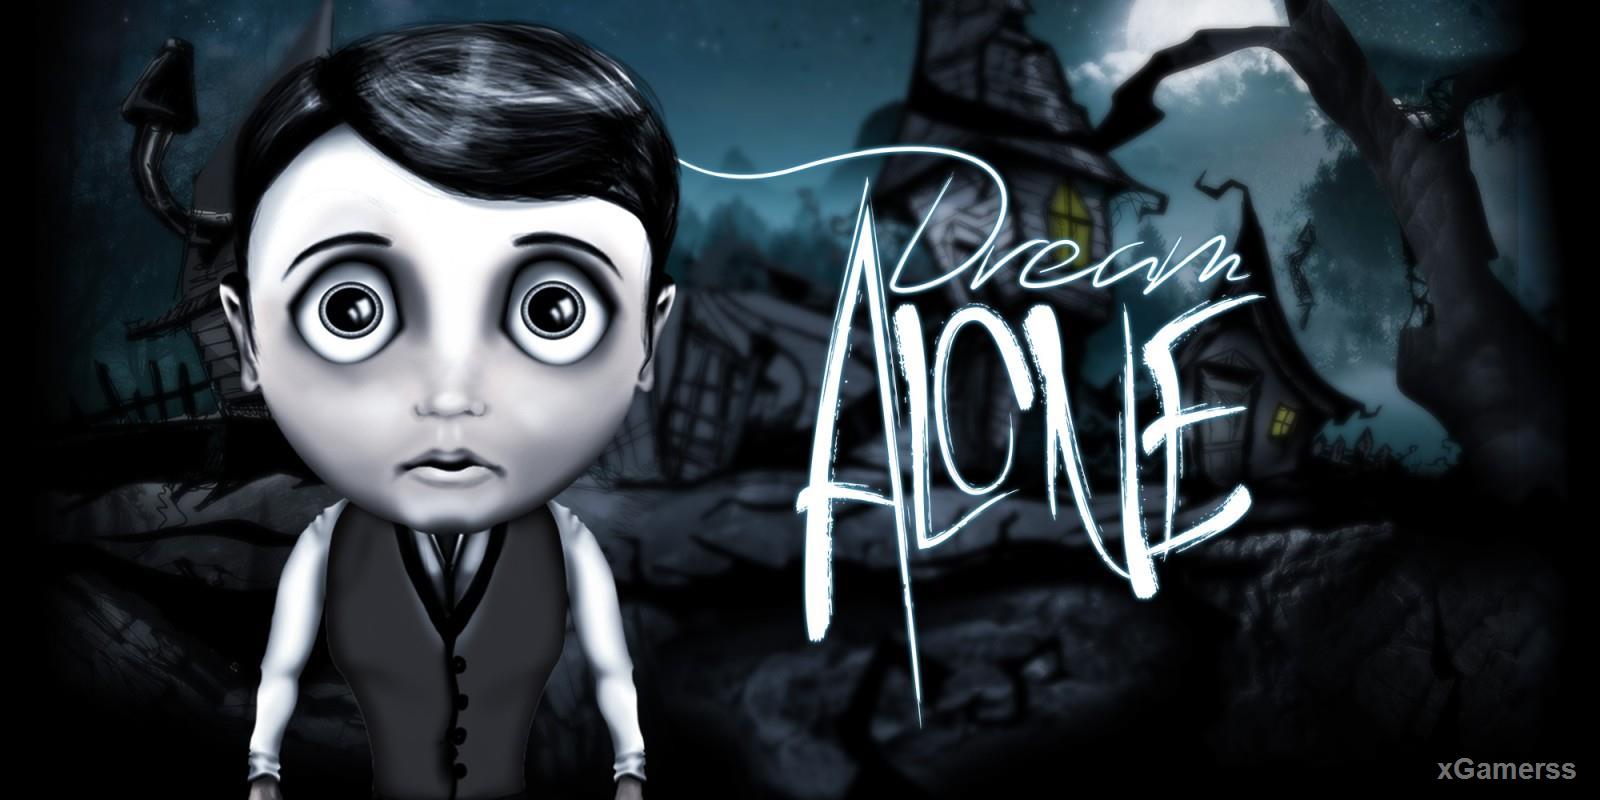 Dream Alone is a game that is paired with a dark brooding style